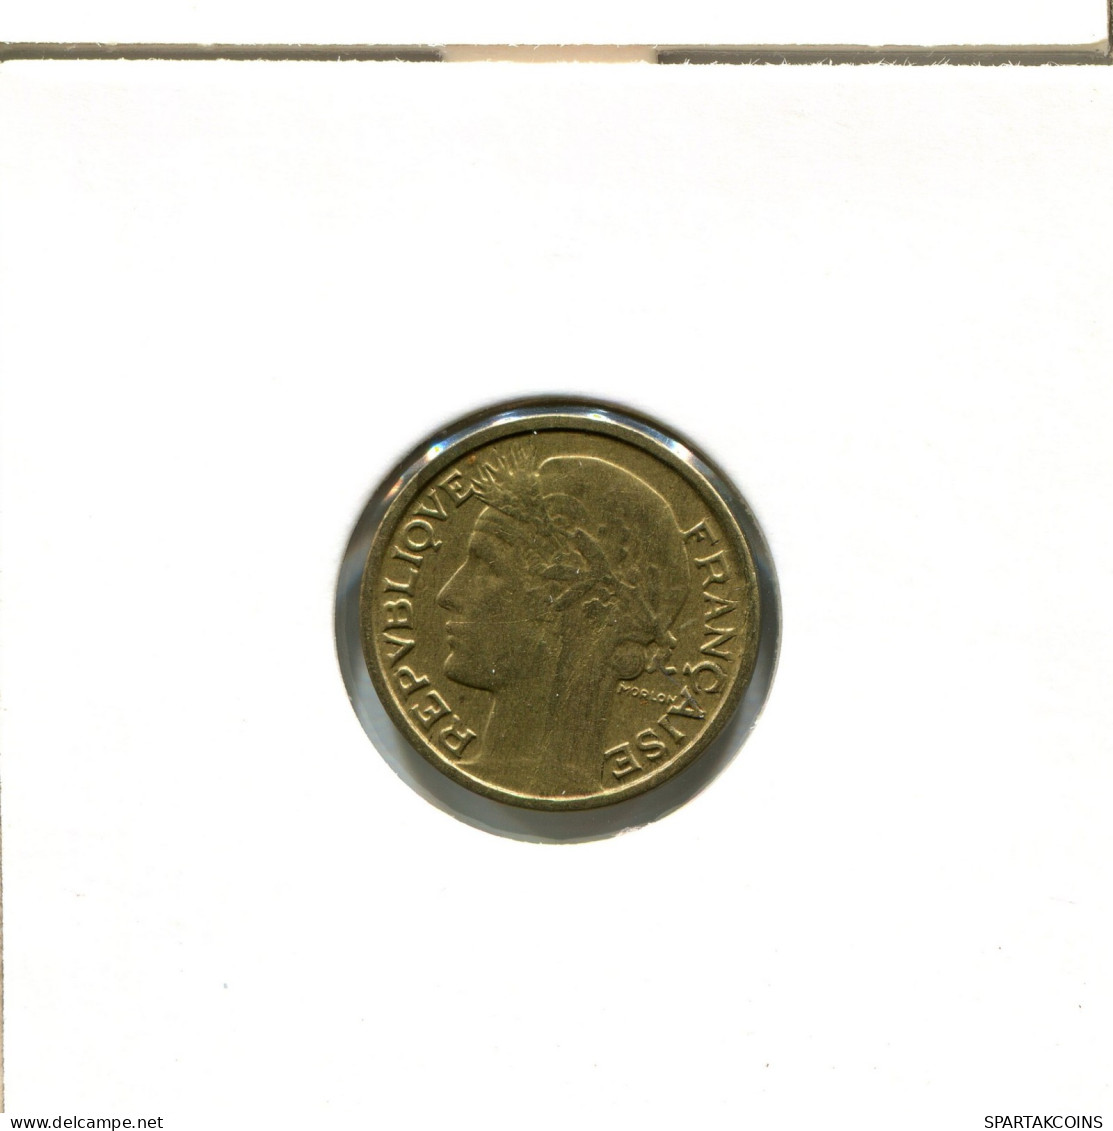 50 CENTIMES 1939 FRANCE Coin #AW343.U.A - 50 Centimes